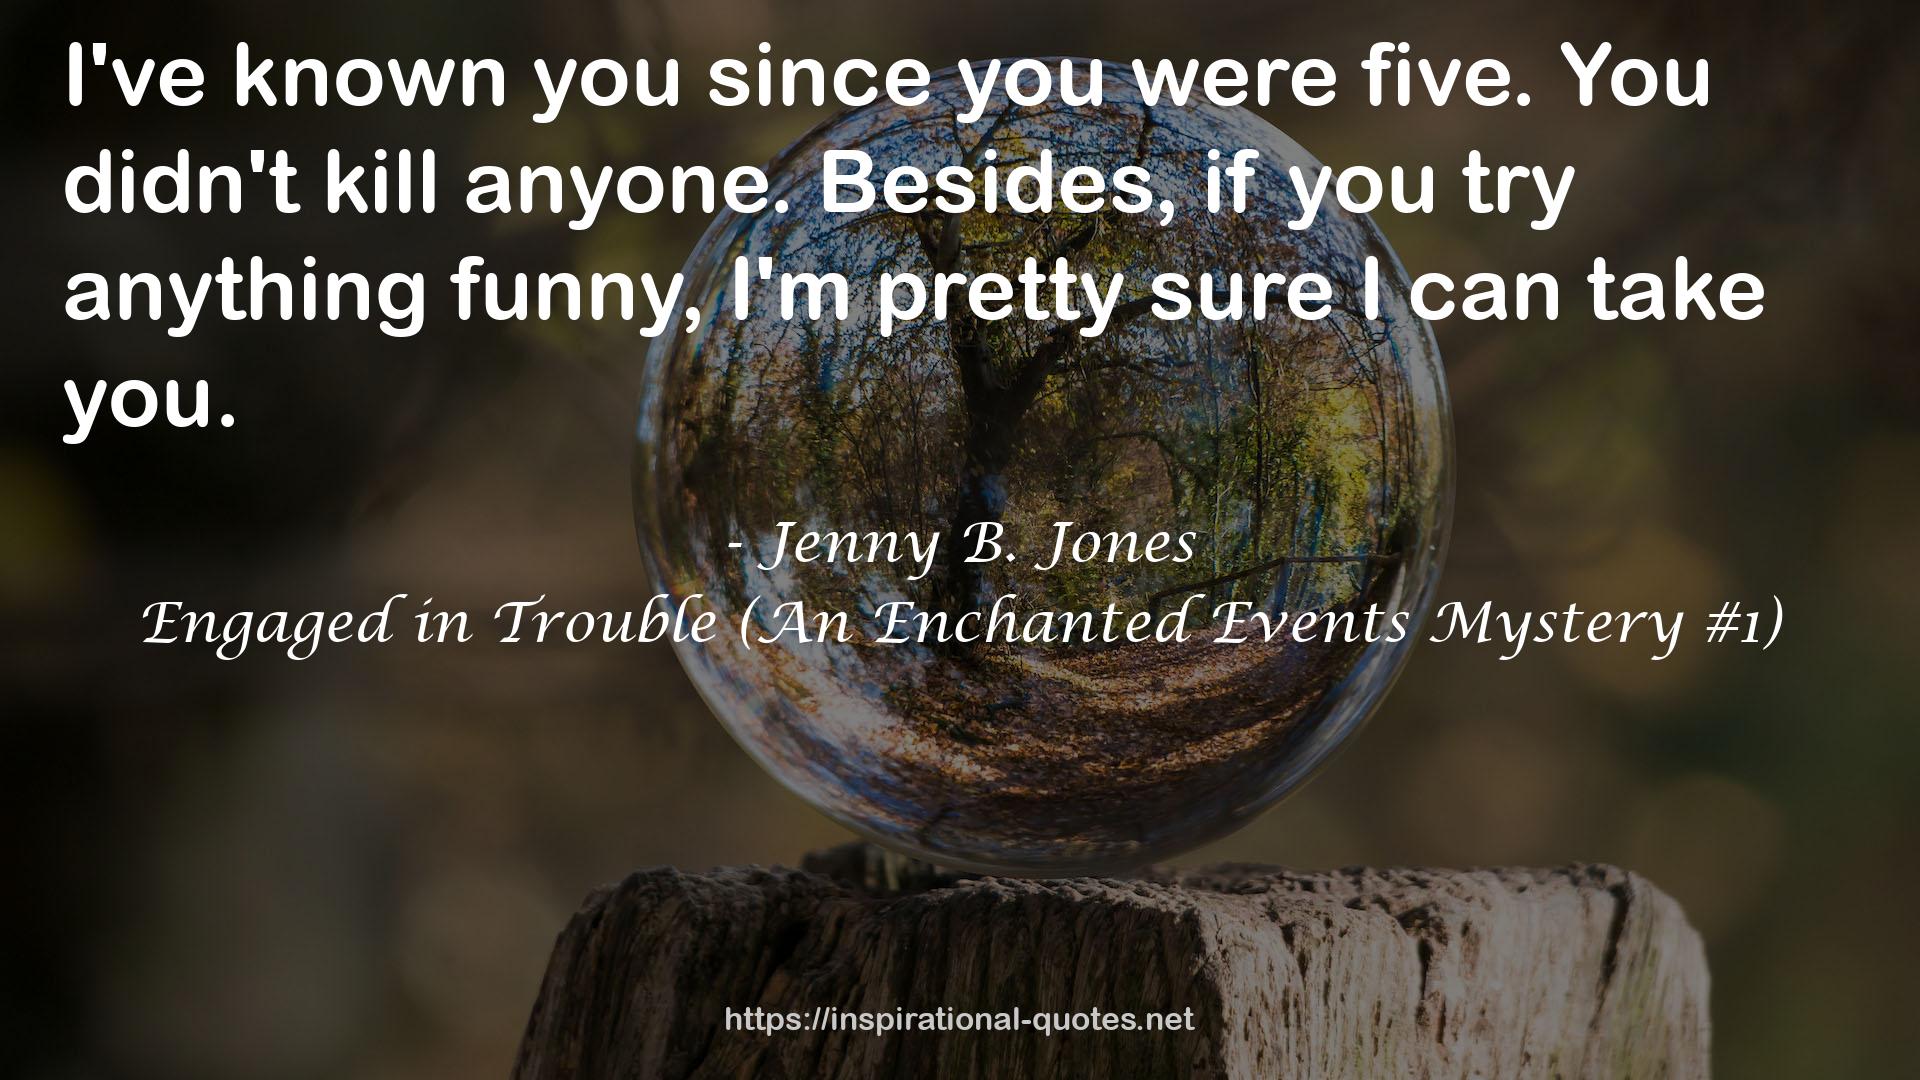 Engaged in Trouble (An Enchanted Events Mystery #1) QUOTES